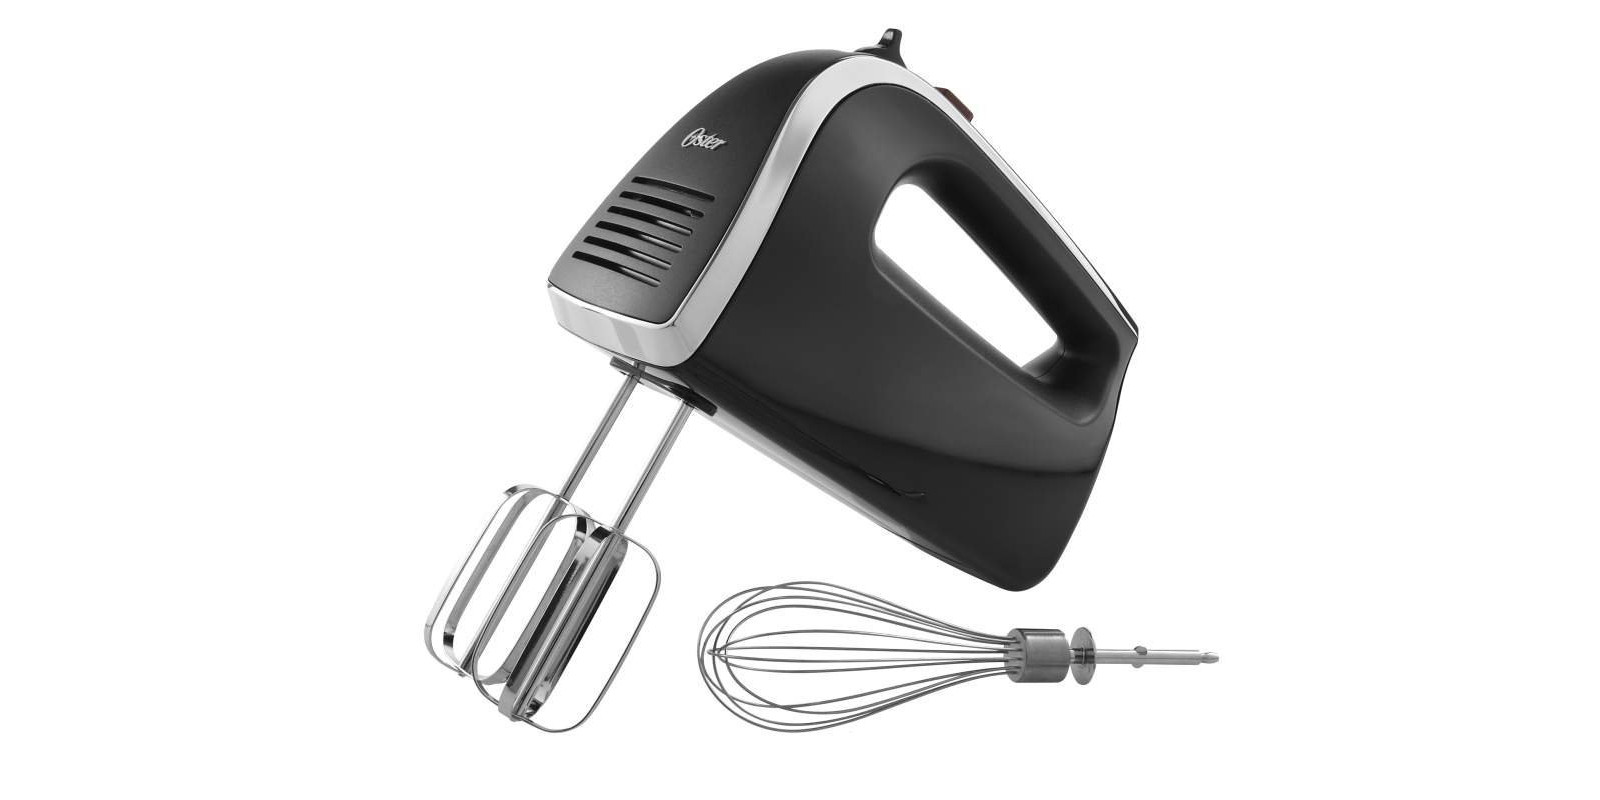 https://9to5toys.com/wp-content/uploads/sites/5/2016/02/oster-6-speed-retractable-cord-hand-mixer-with-clean-start-in-black-fpsthm2578.jpg